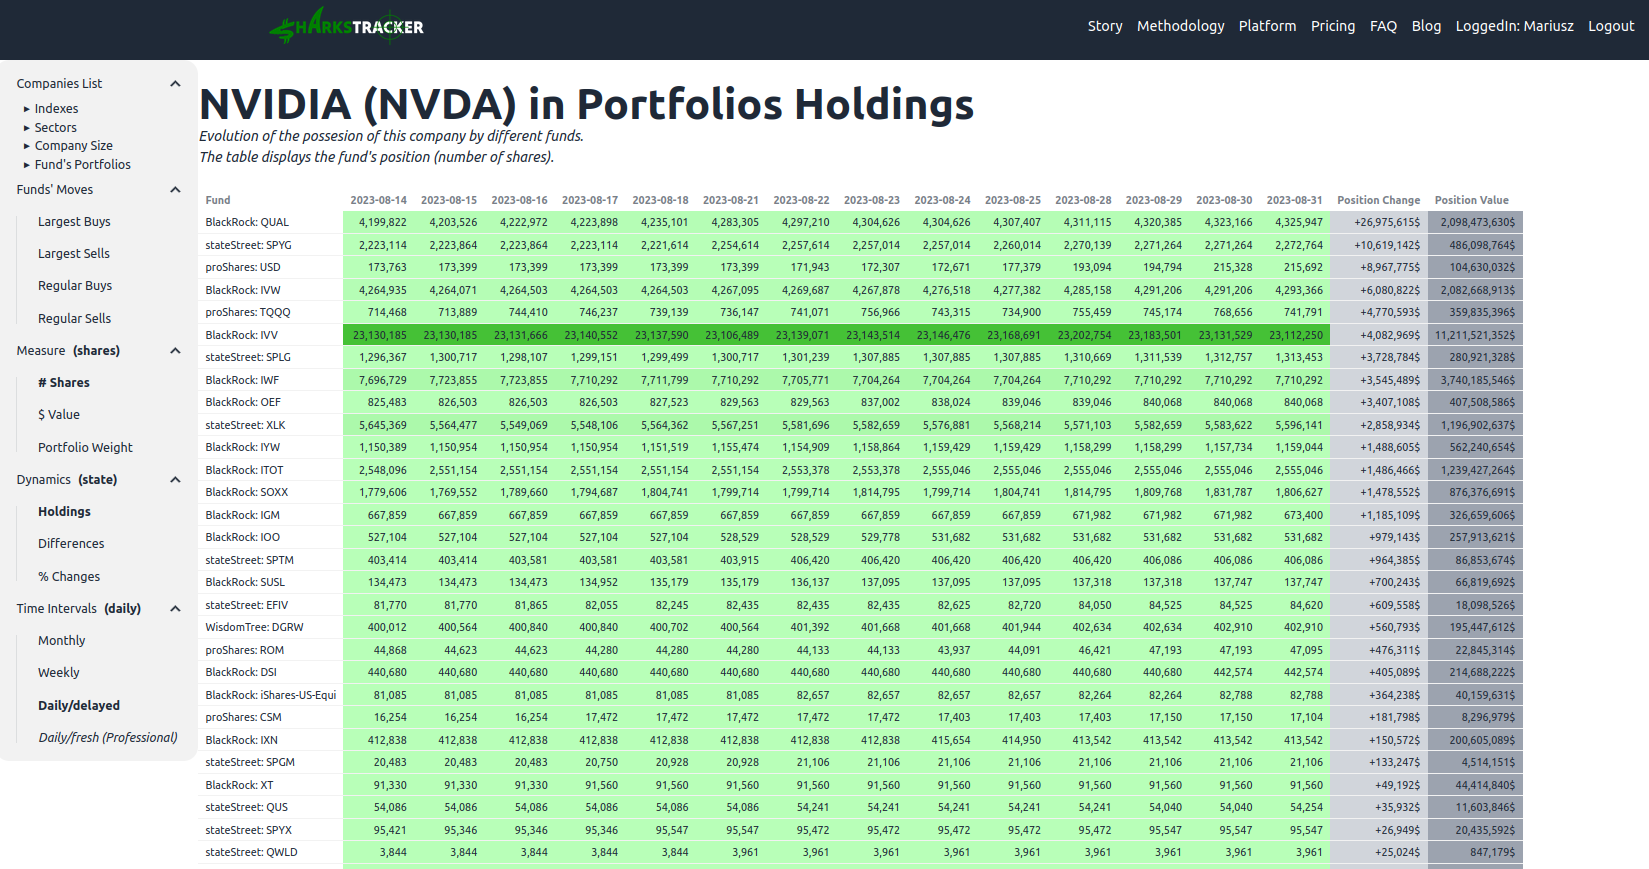 Table with data about changes in portfolio holdings of NVIDIA company